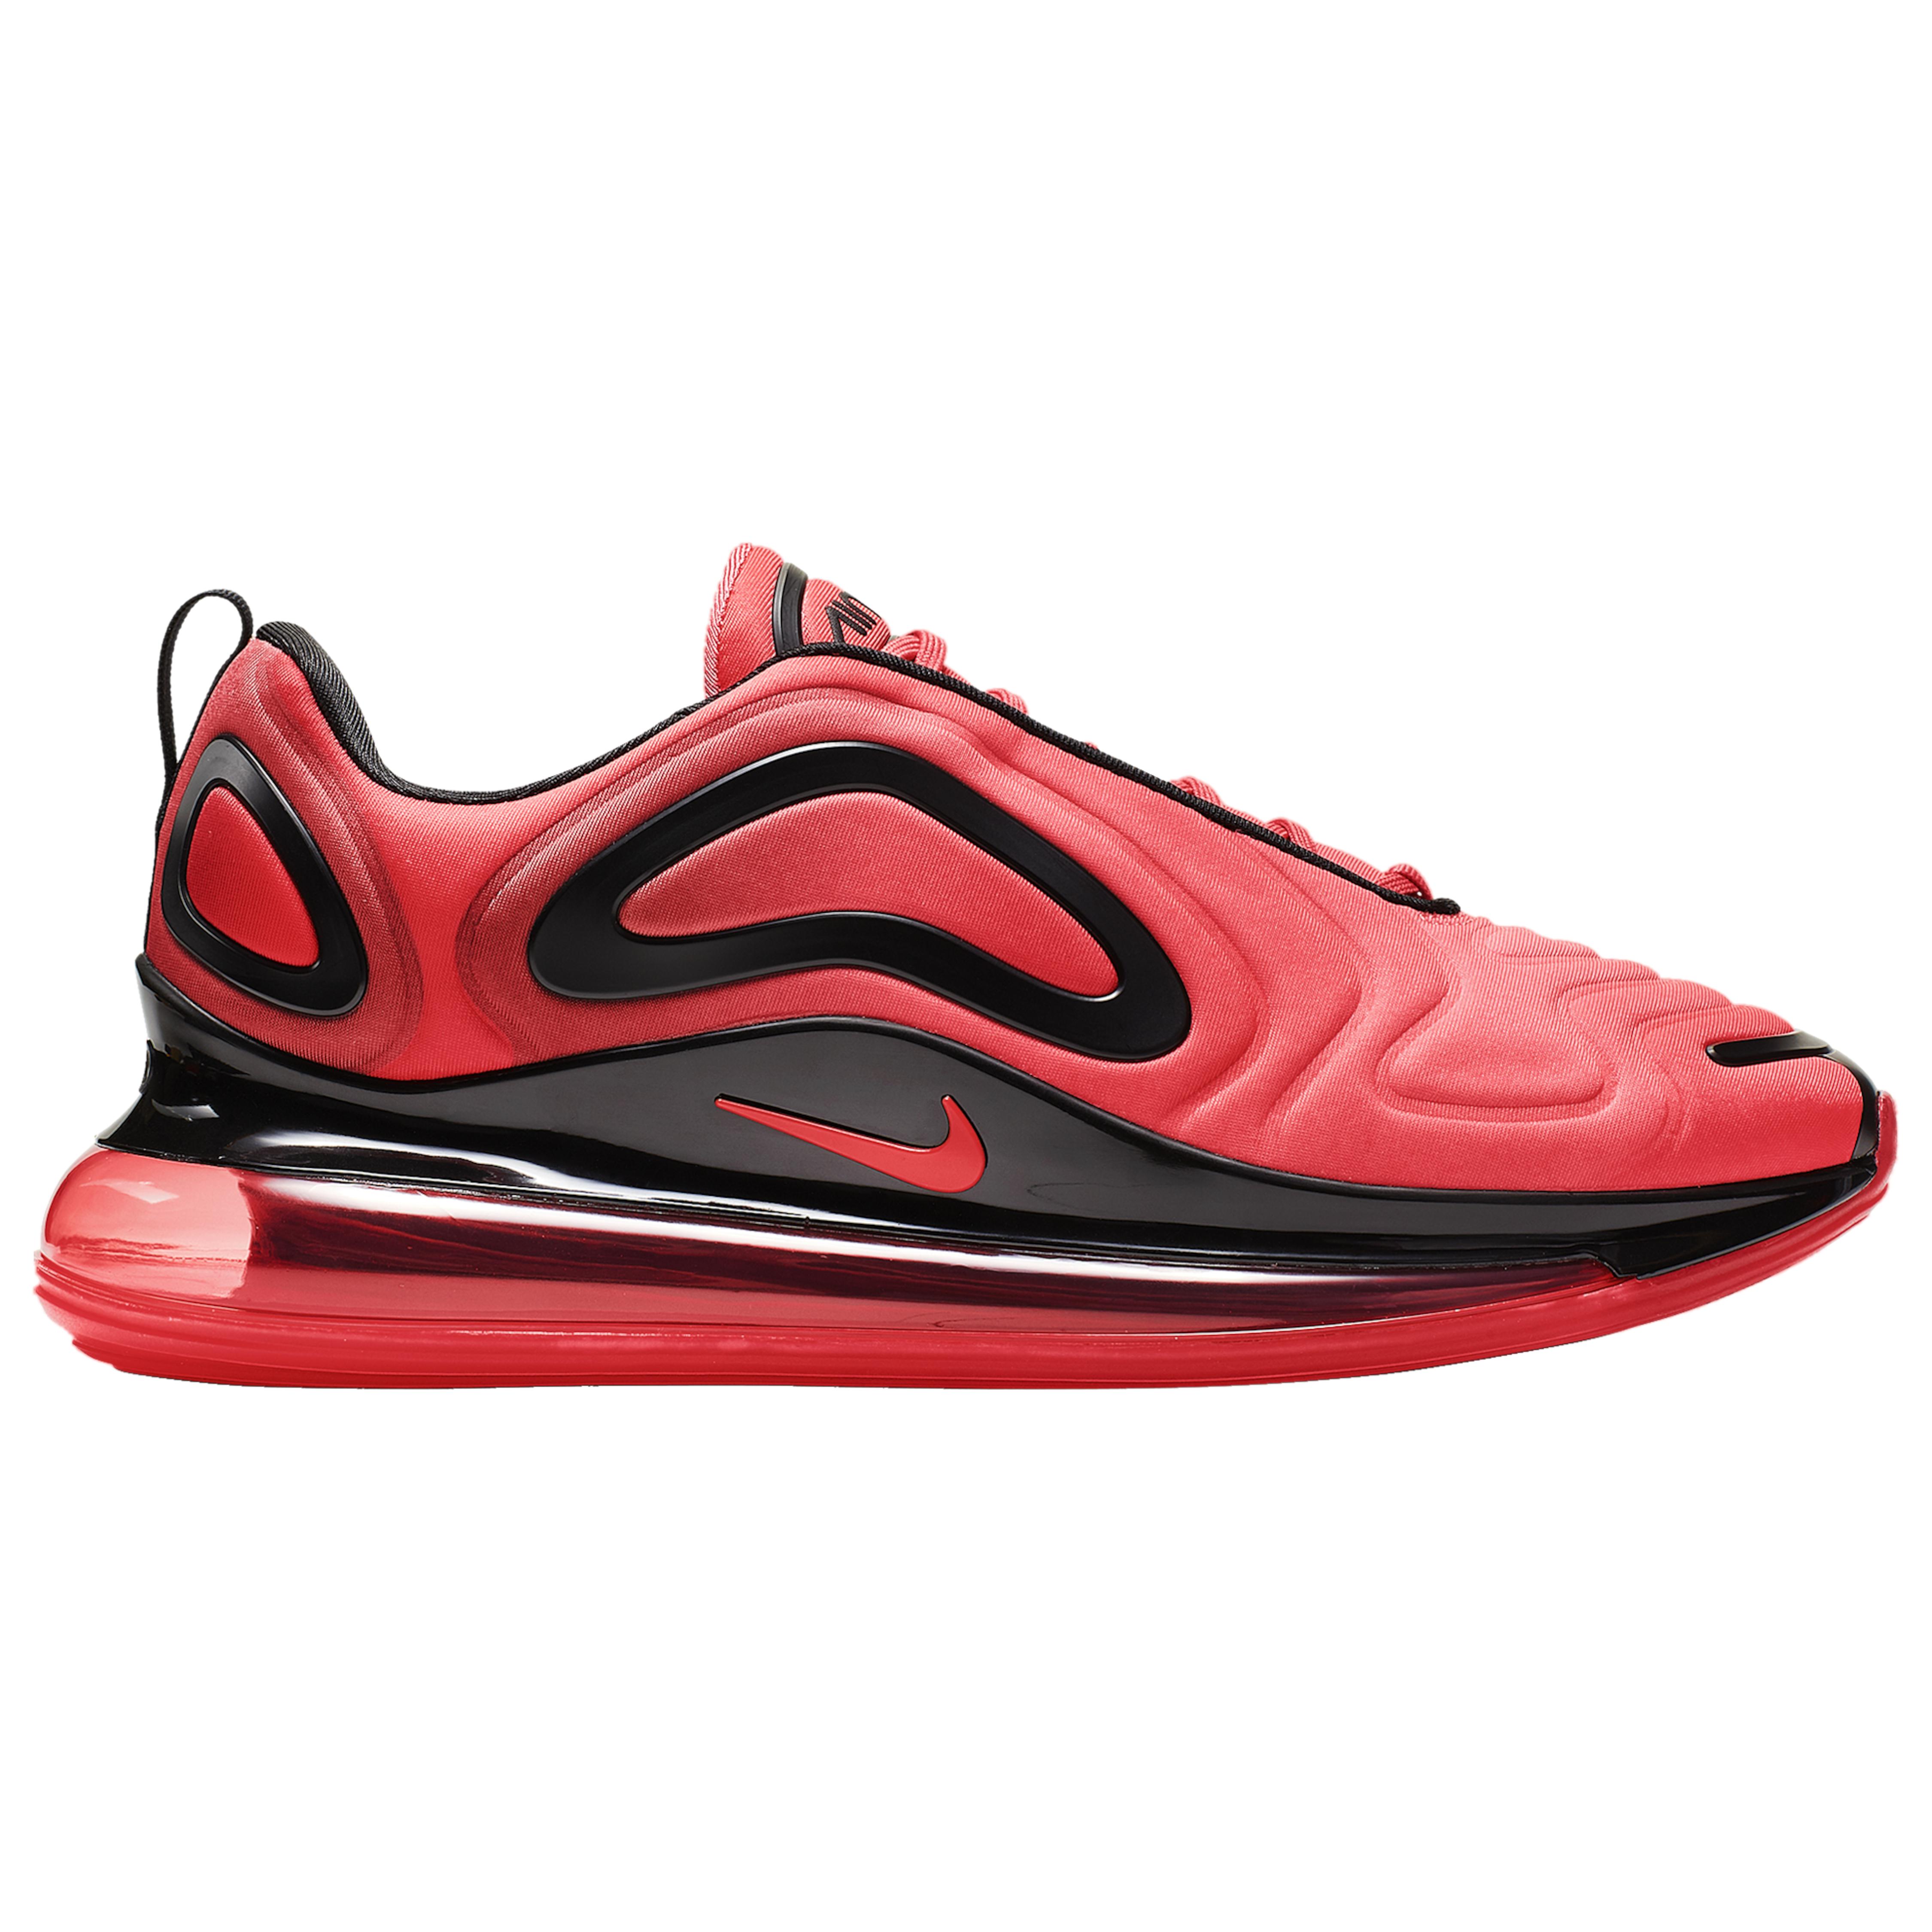 Nike Synthetic Air Max 720 in Bright Crimson/Black (Red) for Men - Lyst